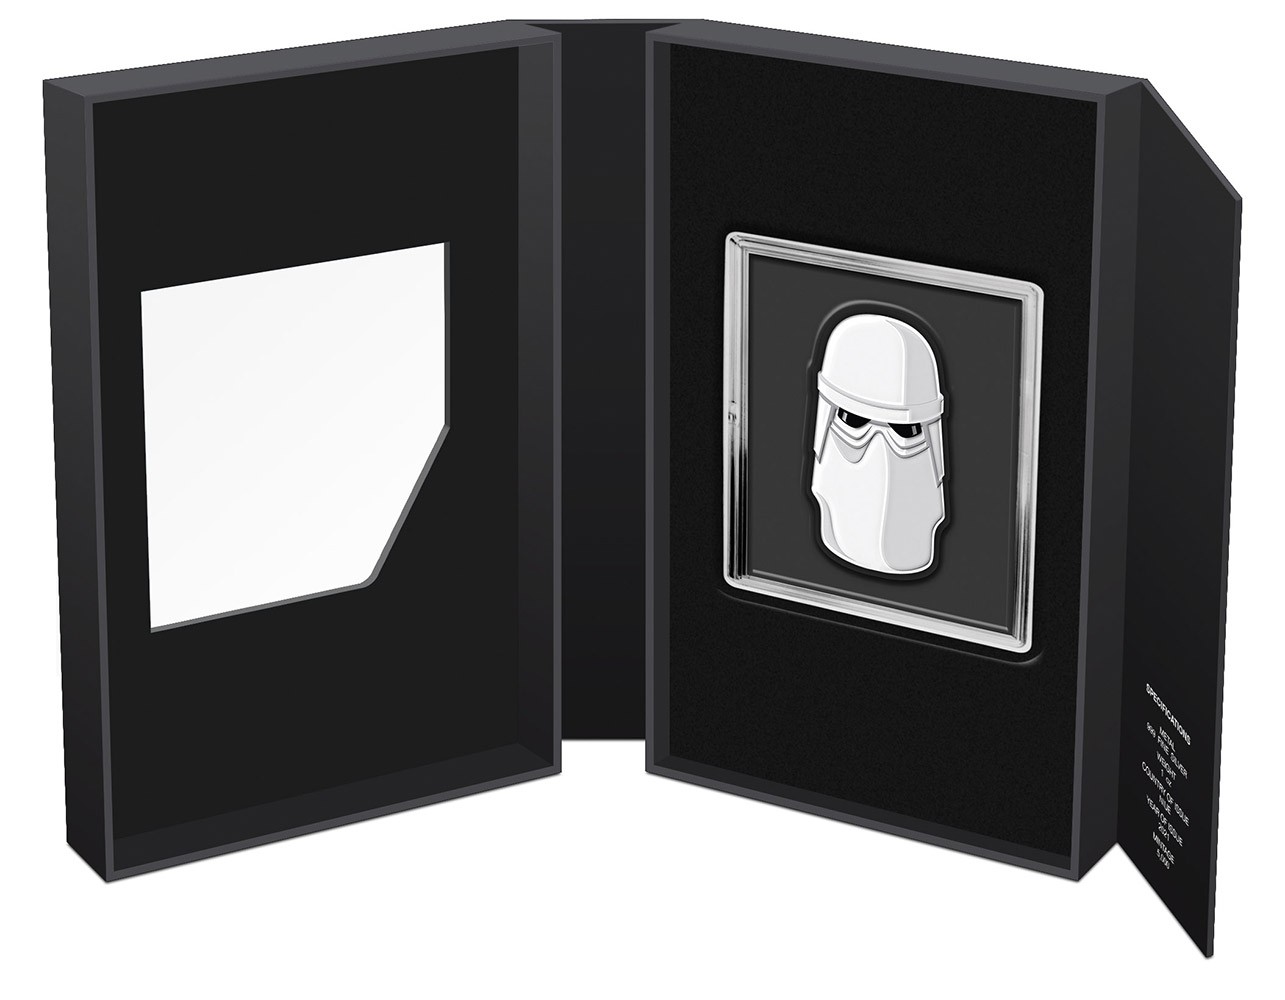 Imperial Snow Trooper 1oz Silver Coin- Prototype Shown